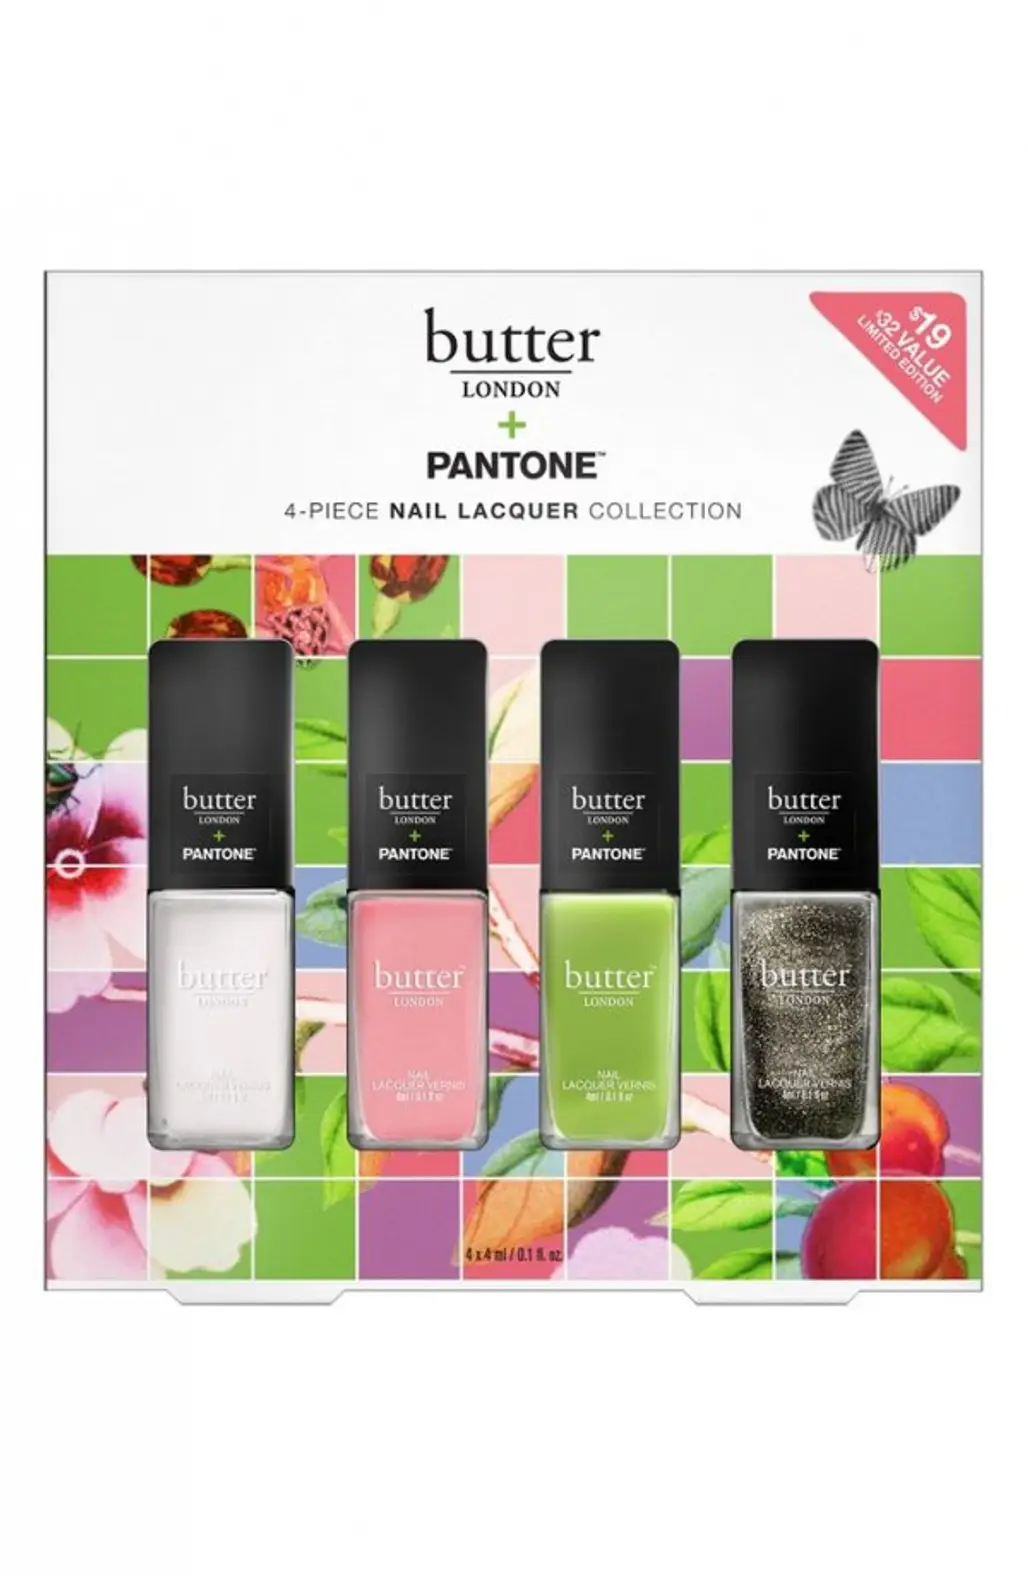 Butter London, color, perfume, beauty, product,